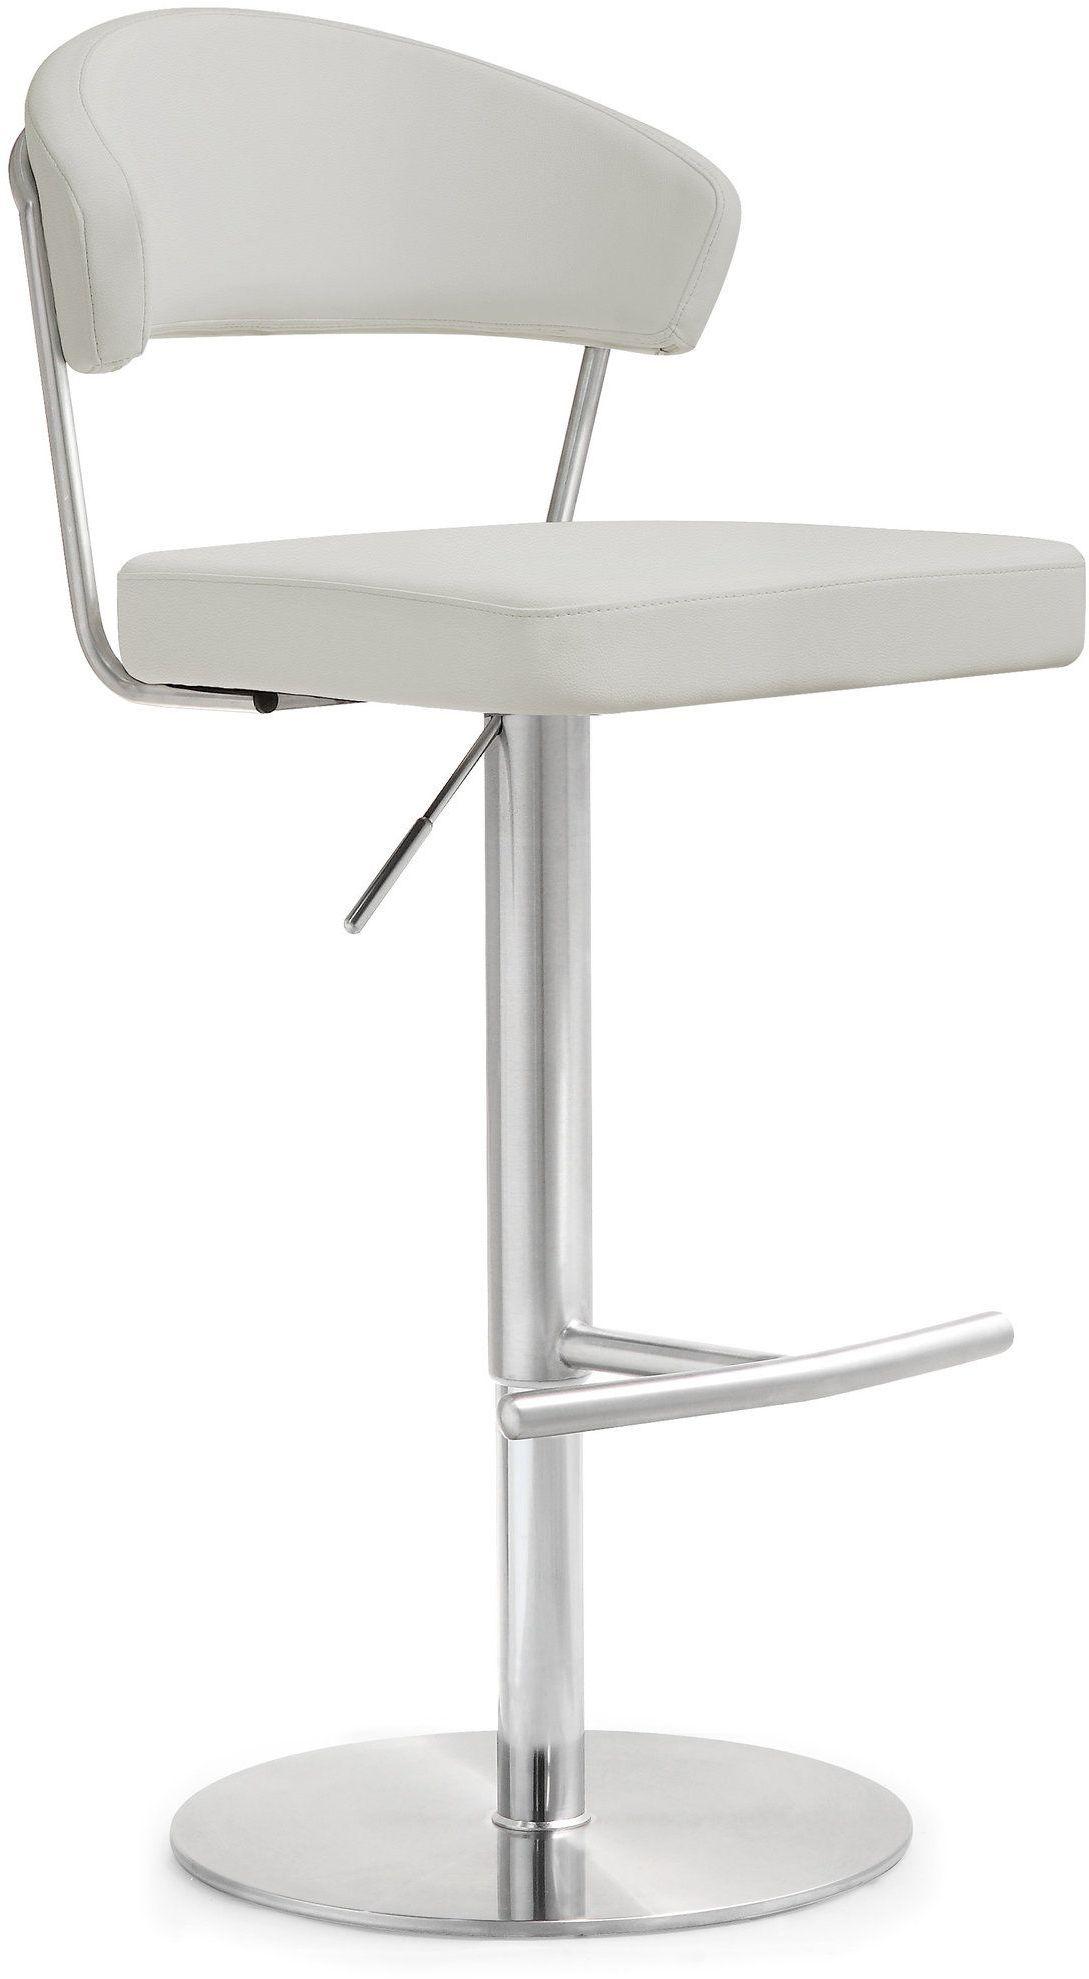 Tov Furniture Stools - Cosmo Light Grey Stainless Steel Barstool